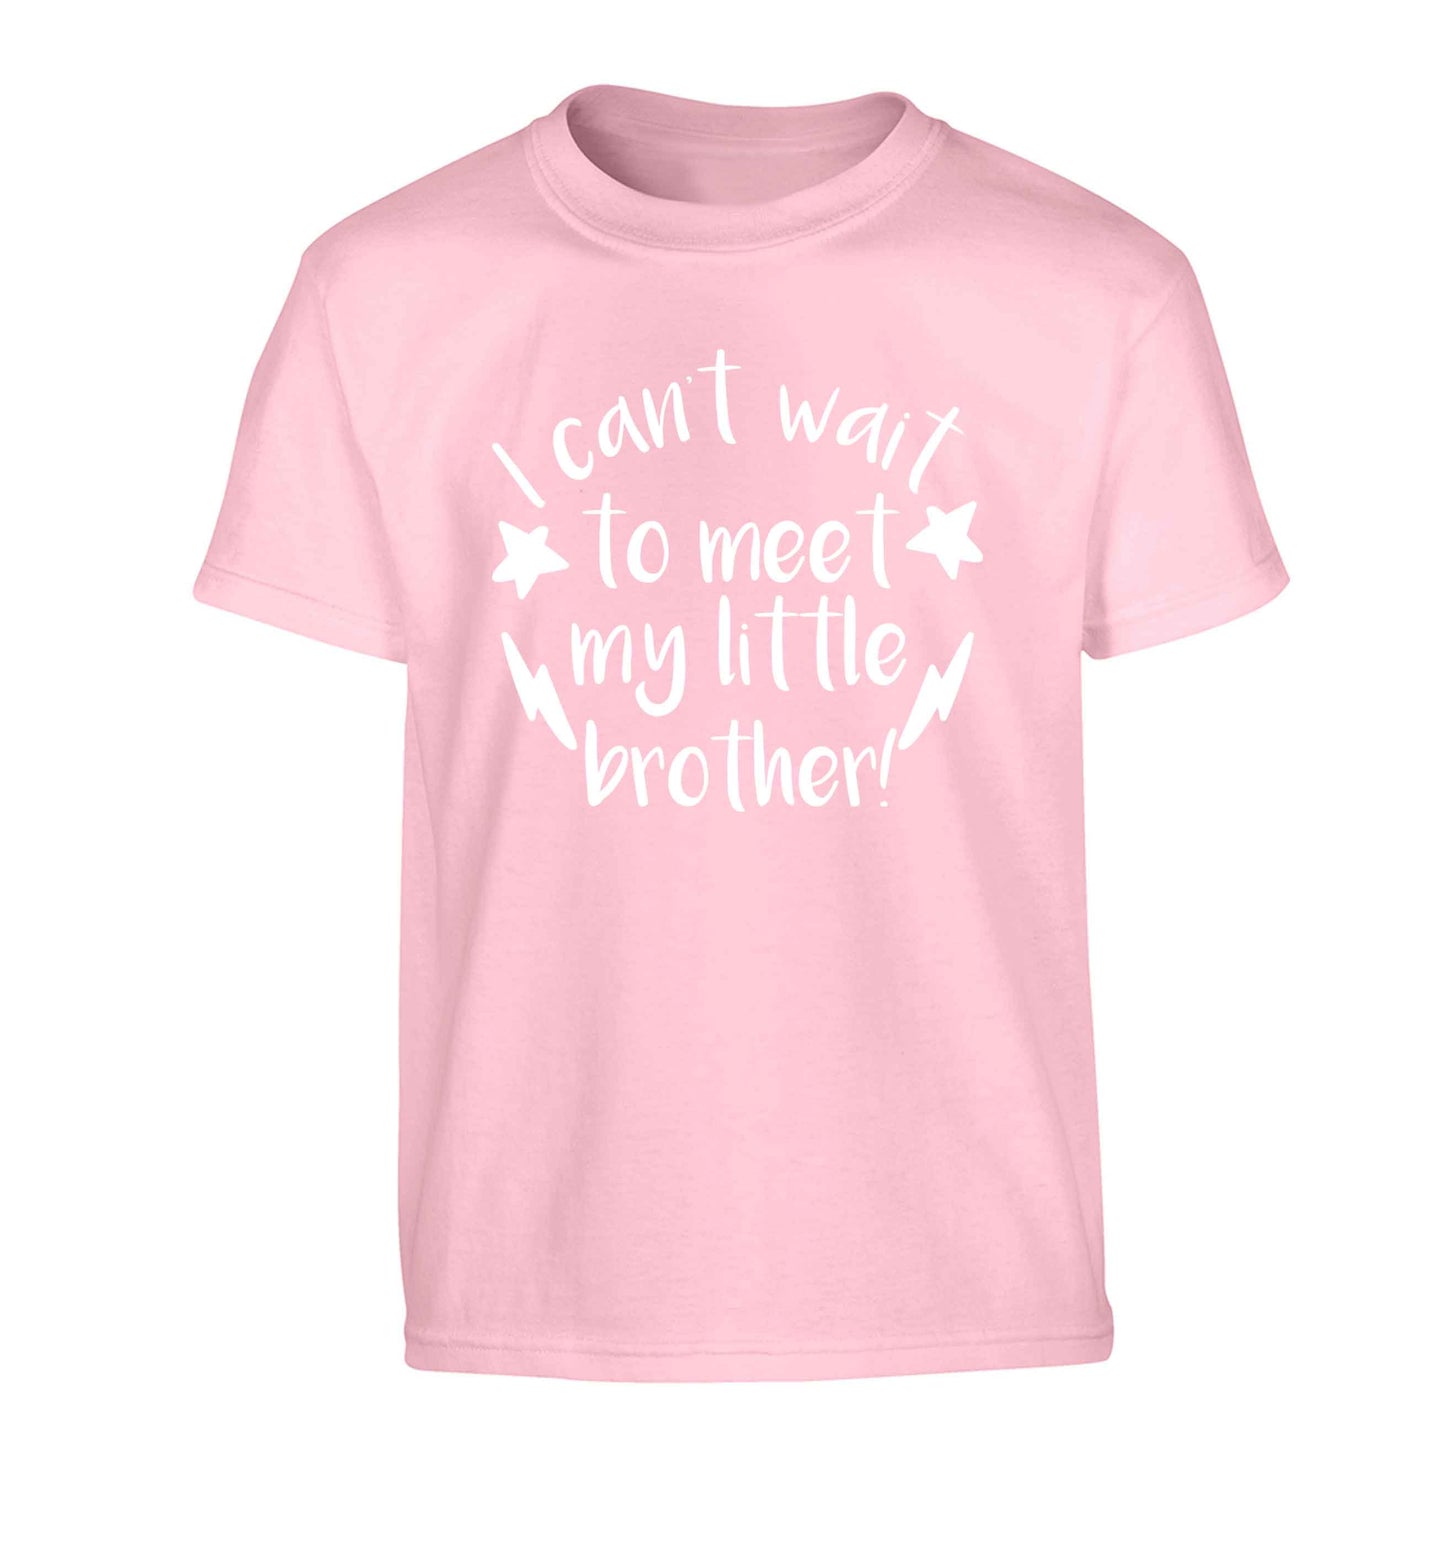 I can't wait to meet my sister! Children's light pink Tshirt 12-13 Years